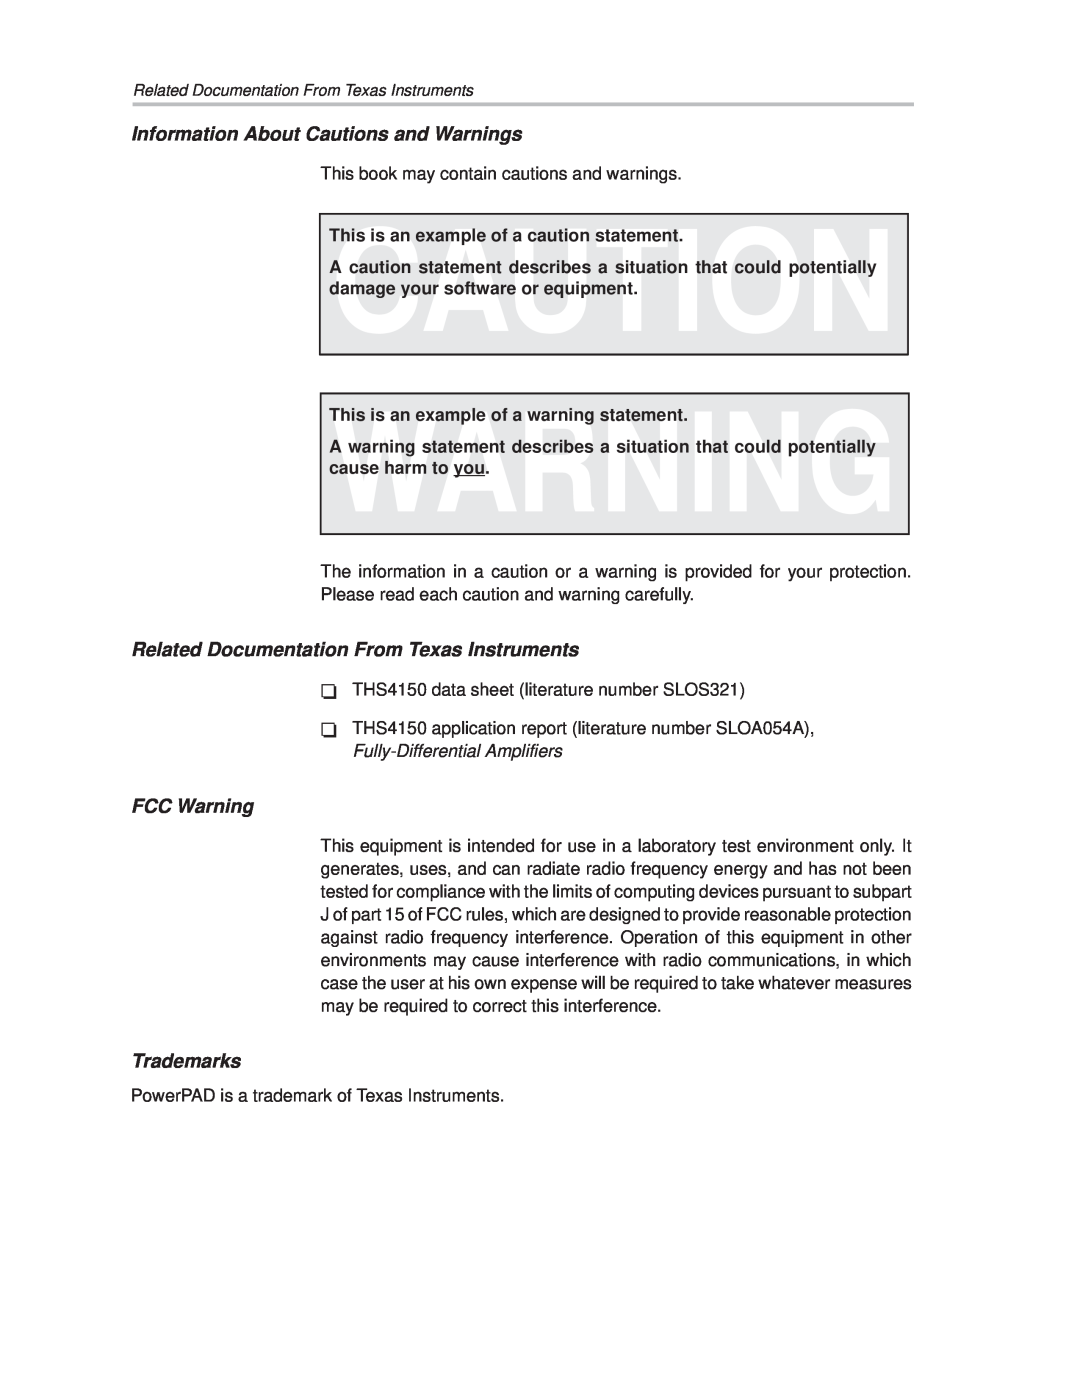 Texas Instruments THS4150 manual Information About Cautions and Warnings, Related Documentation From Texas Instruments 